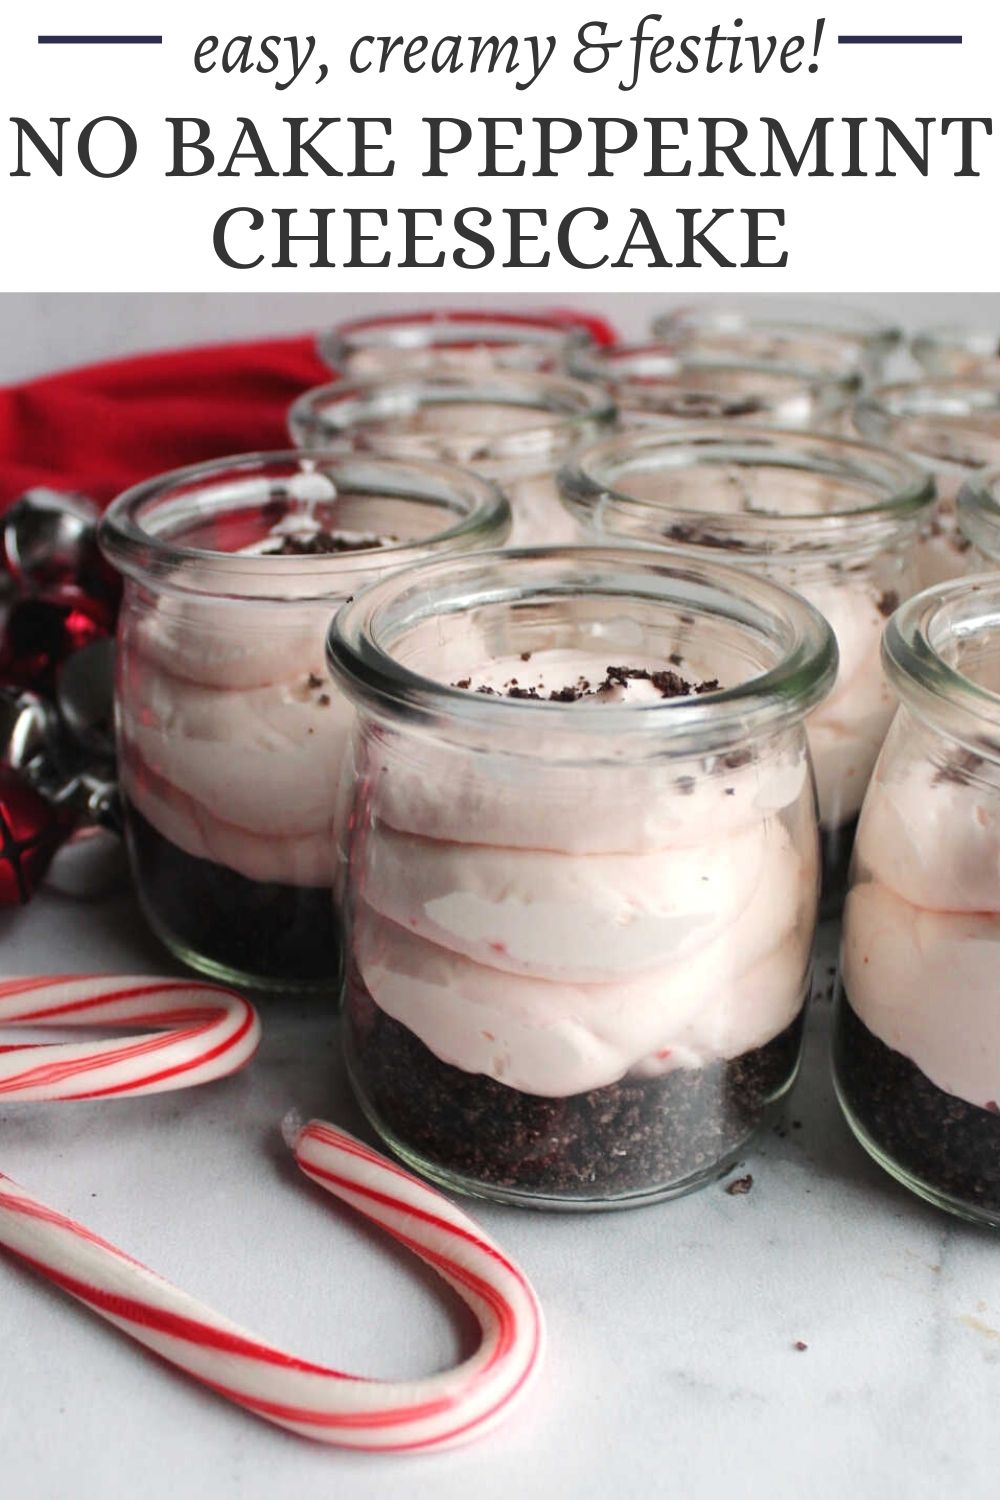 An easy to make no bake cheesecake loaded with candy canes is a perfect addition to your Christmas dessert table. It takes just 6 ingredients and a few minutes to put together and tastes like the holidays! Make it in a springform pan or make it in little jars for cute single serve desserts.